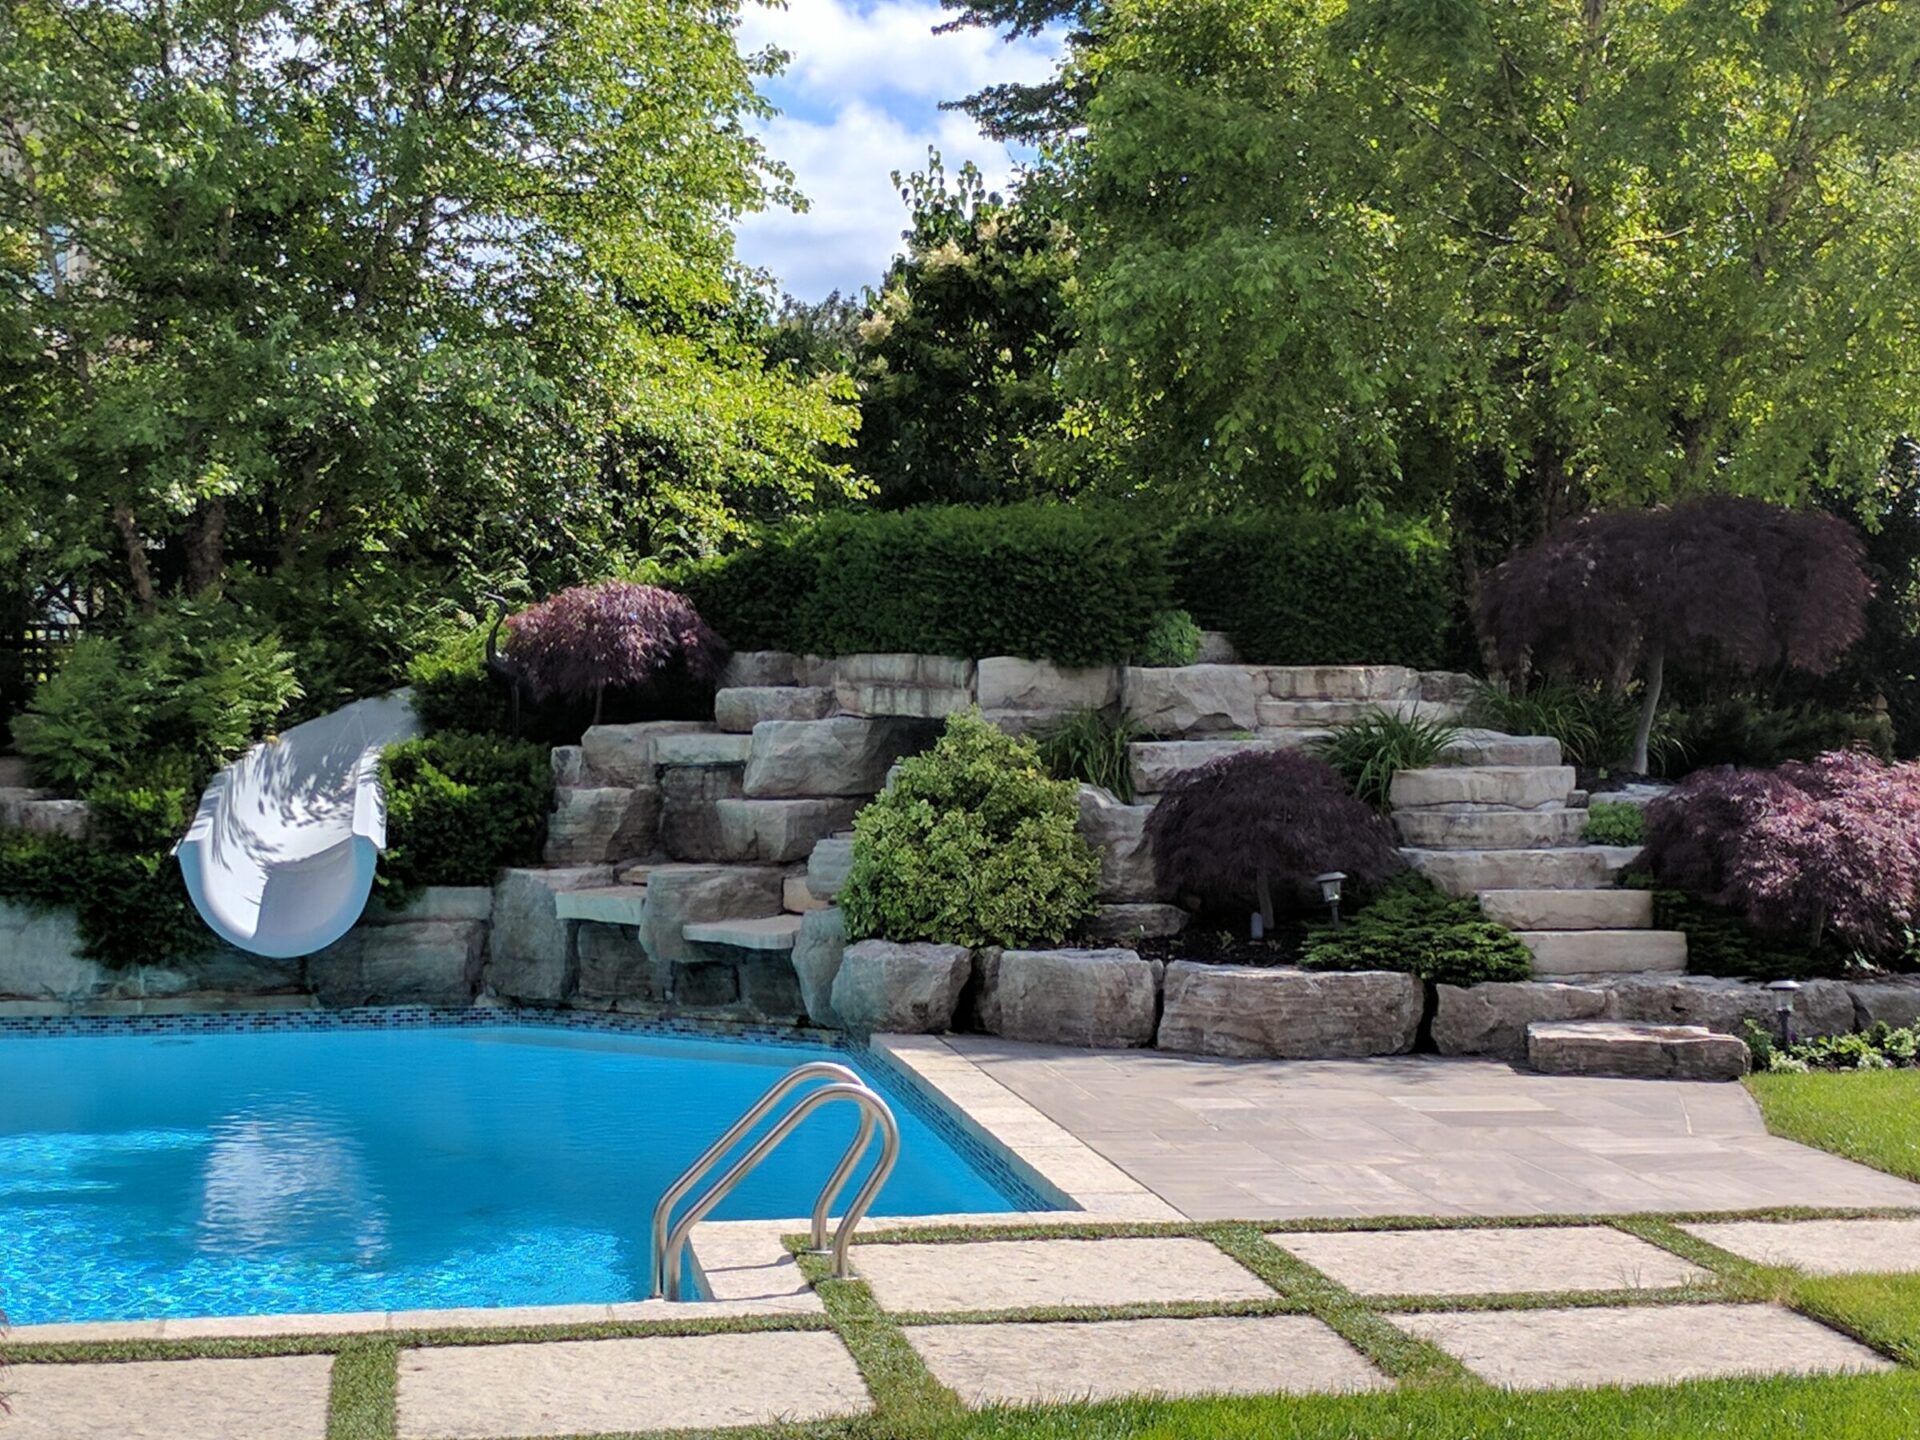 A backyard with a blue swimming pool, stone steps, a white slide, landscaped with various plants and trees under a sunny blue sky.